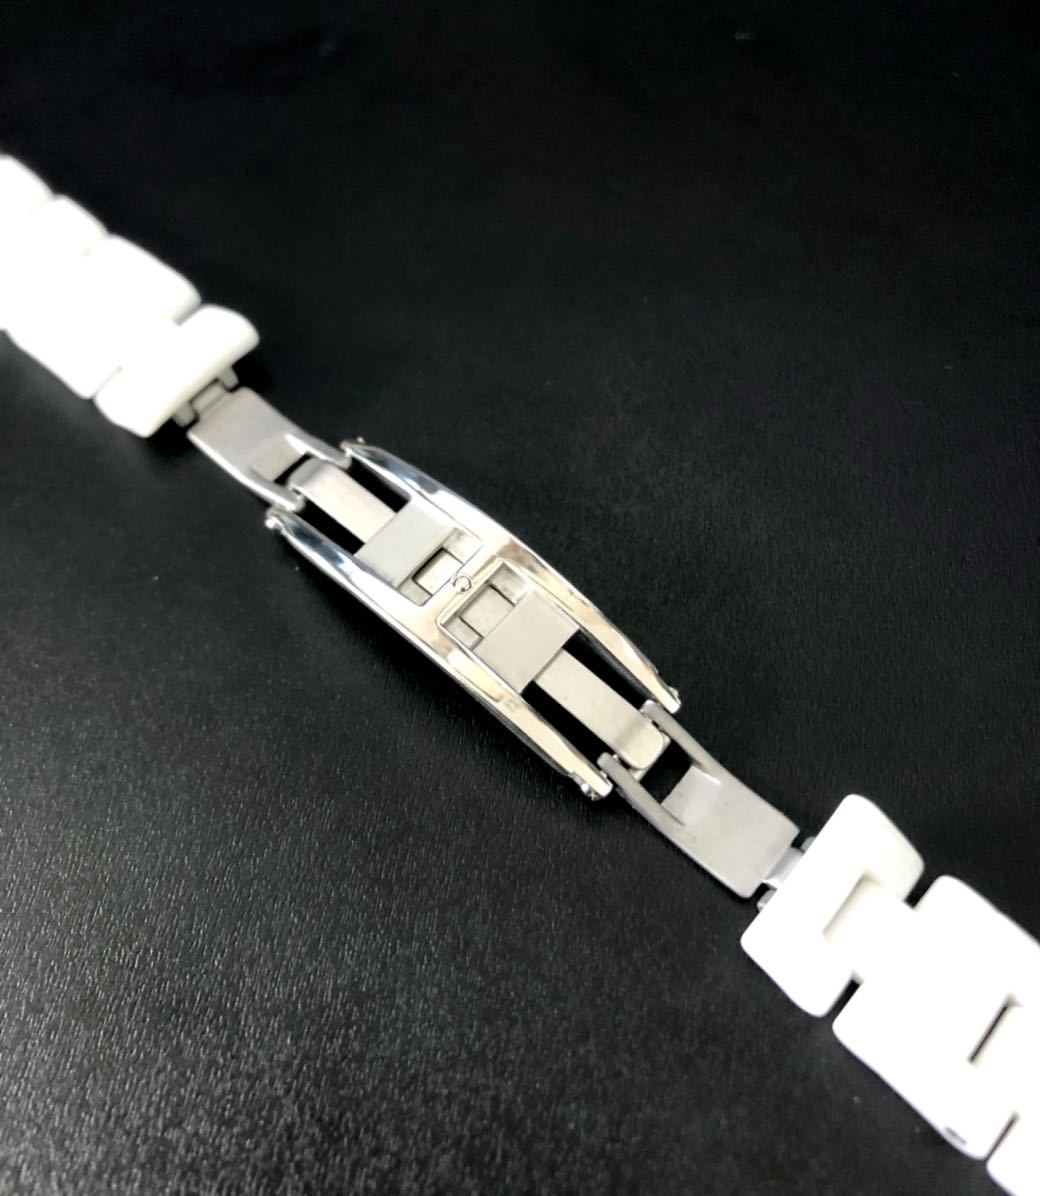 16mm wristwatch repair for exchange after market goods ceramic bracele white [ correspondence ]CHANEL J12 lady's Chanel 